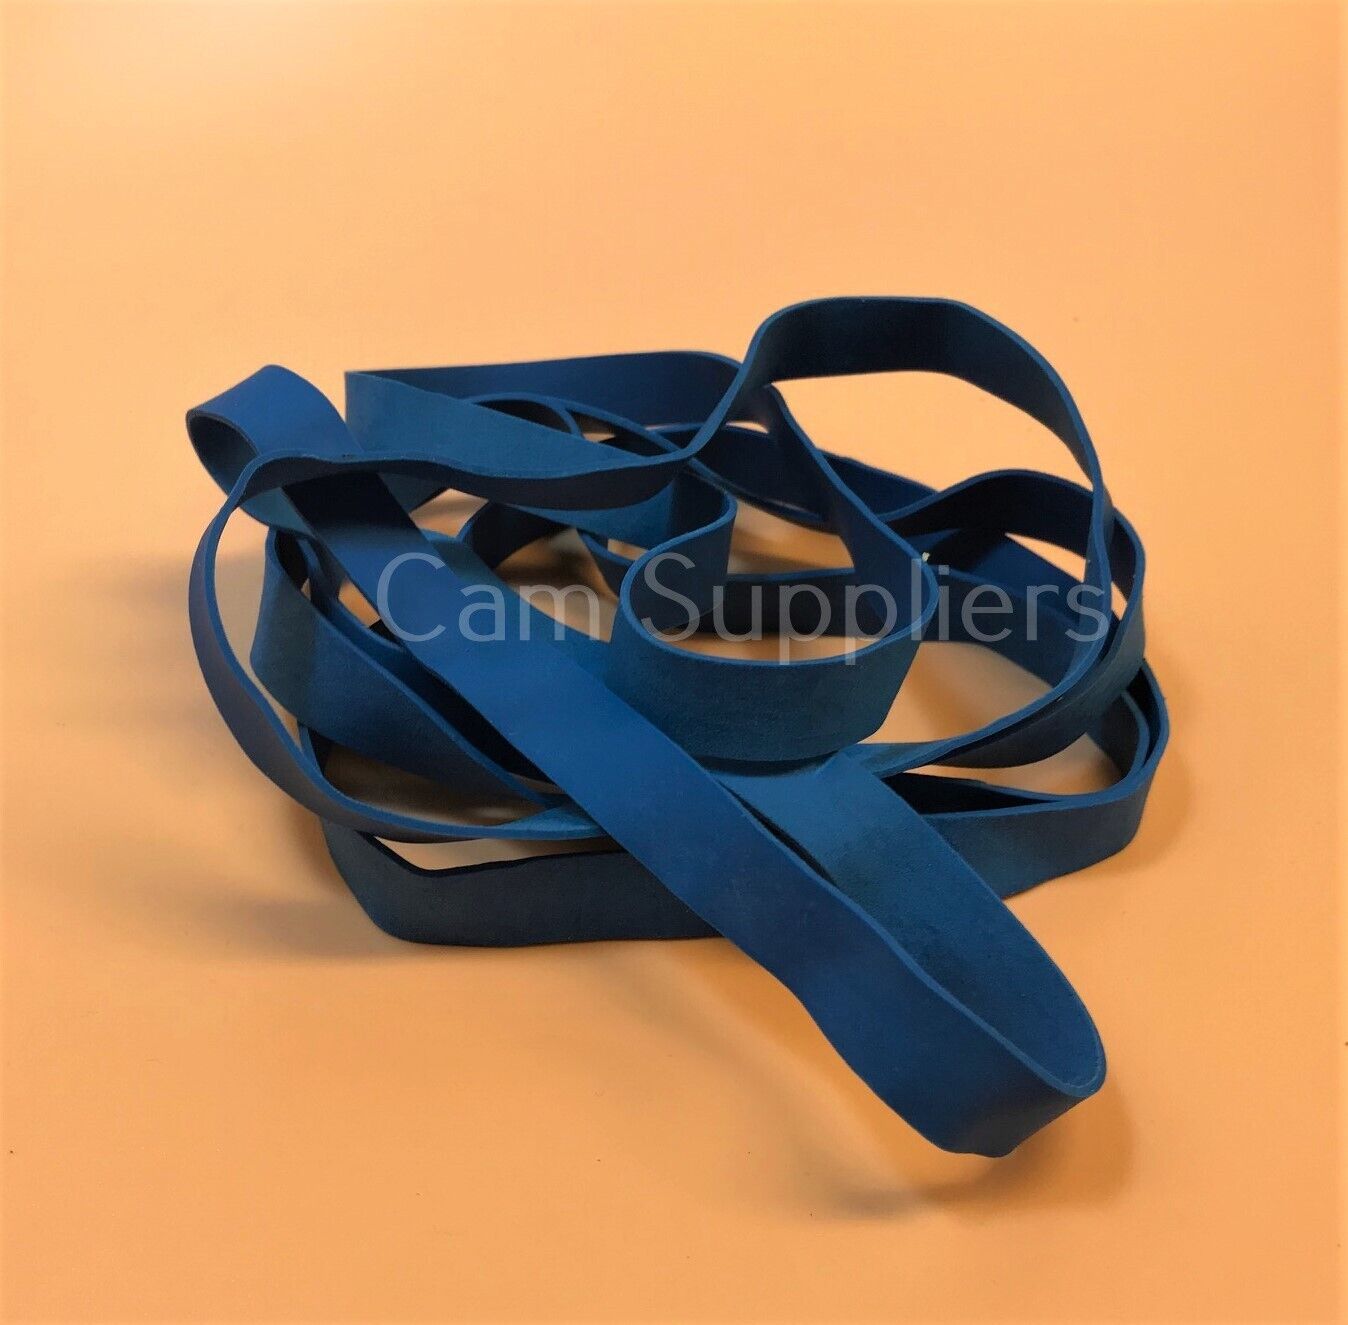 15 x Large Strong Thick 6 x 1/2 Rubber Elastic Bands No.89 152.4